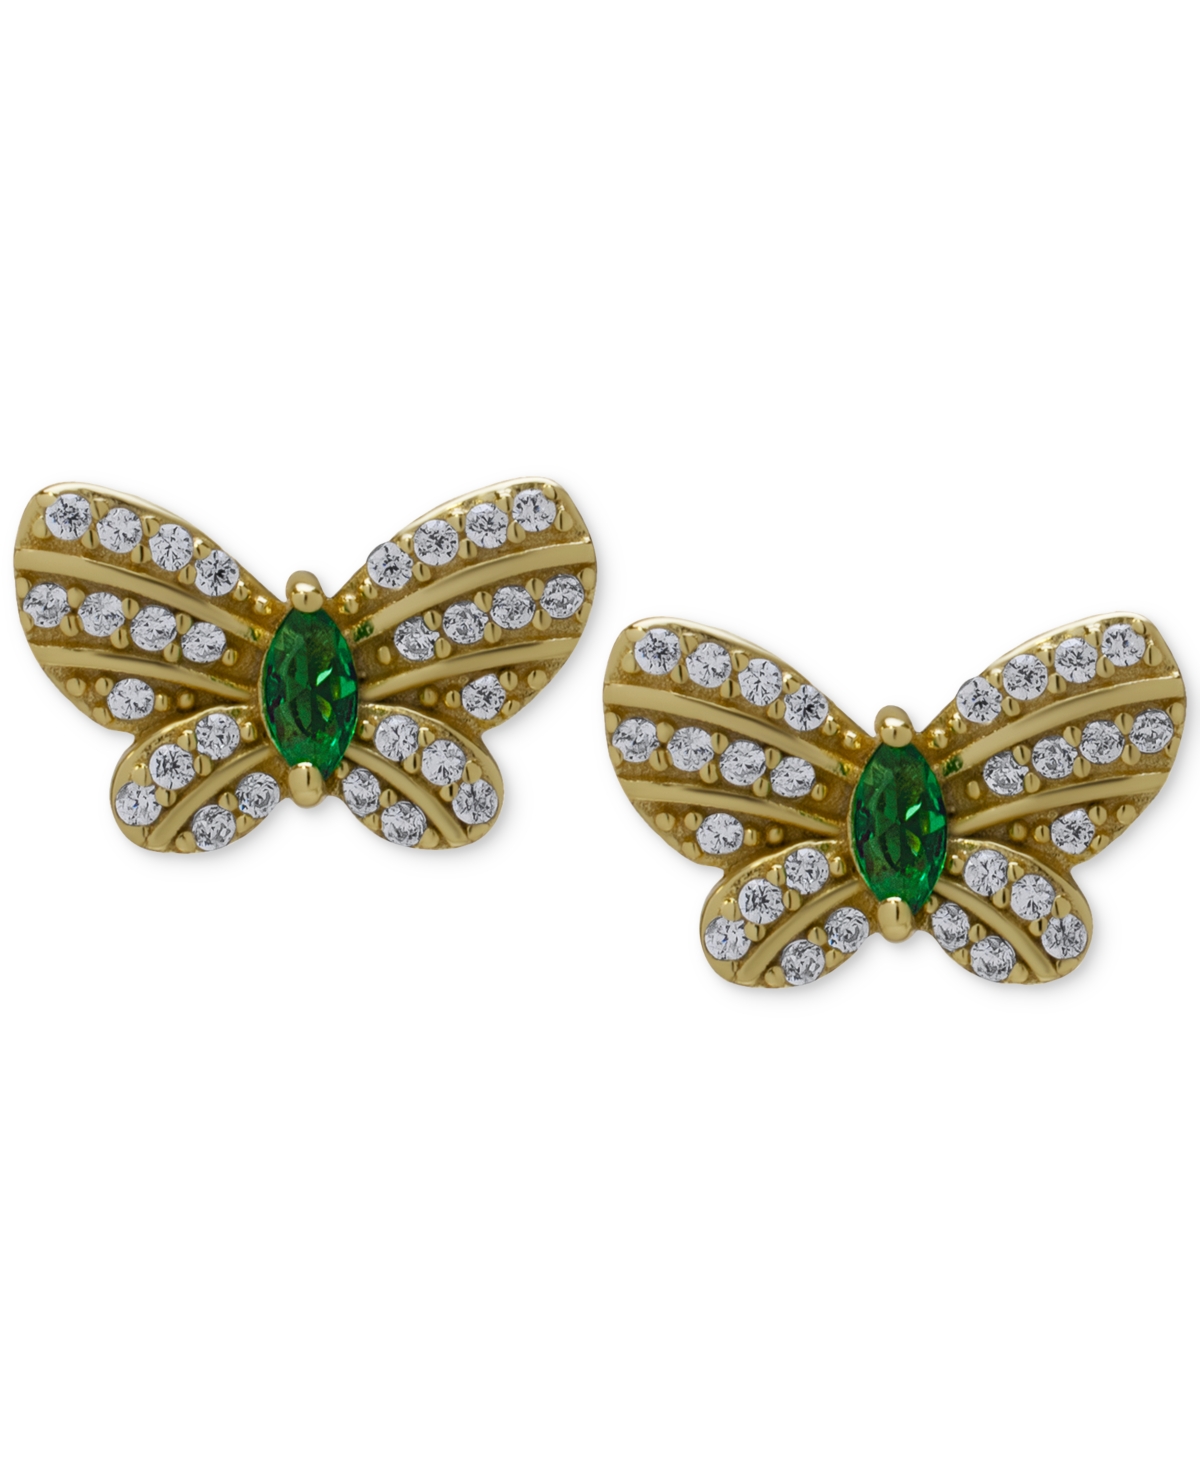 Green Quartz (1/5 ct. t.w.) & Lab Grown White Sapphire (1/2 ct. t.w.) Butterfly Stud Earrings in 14k Gold-Plated Sterling Silver - Green Quartz